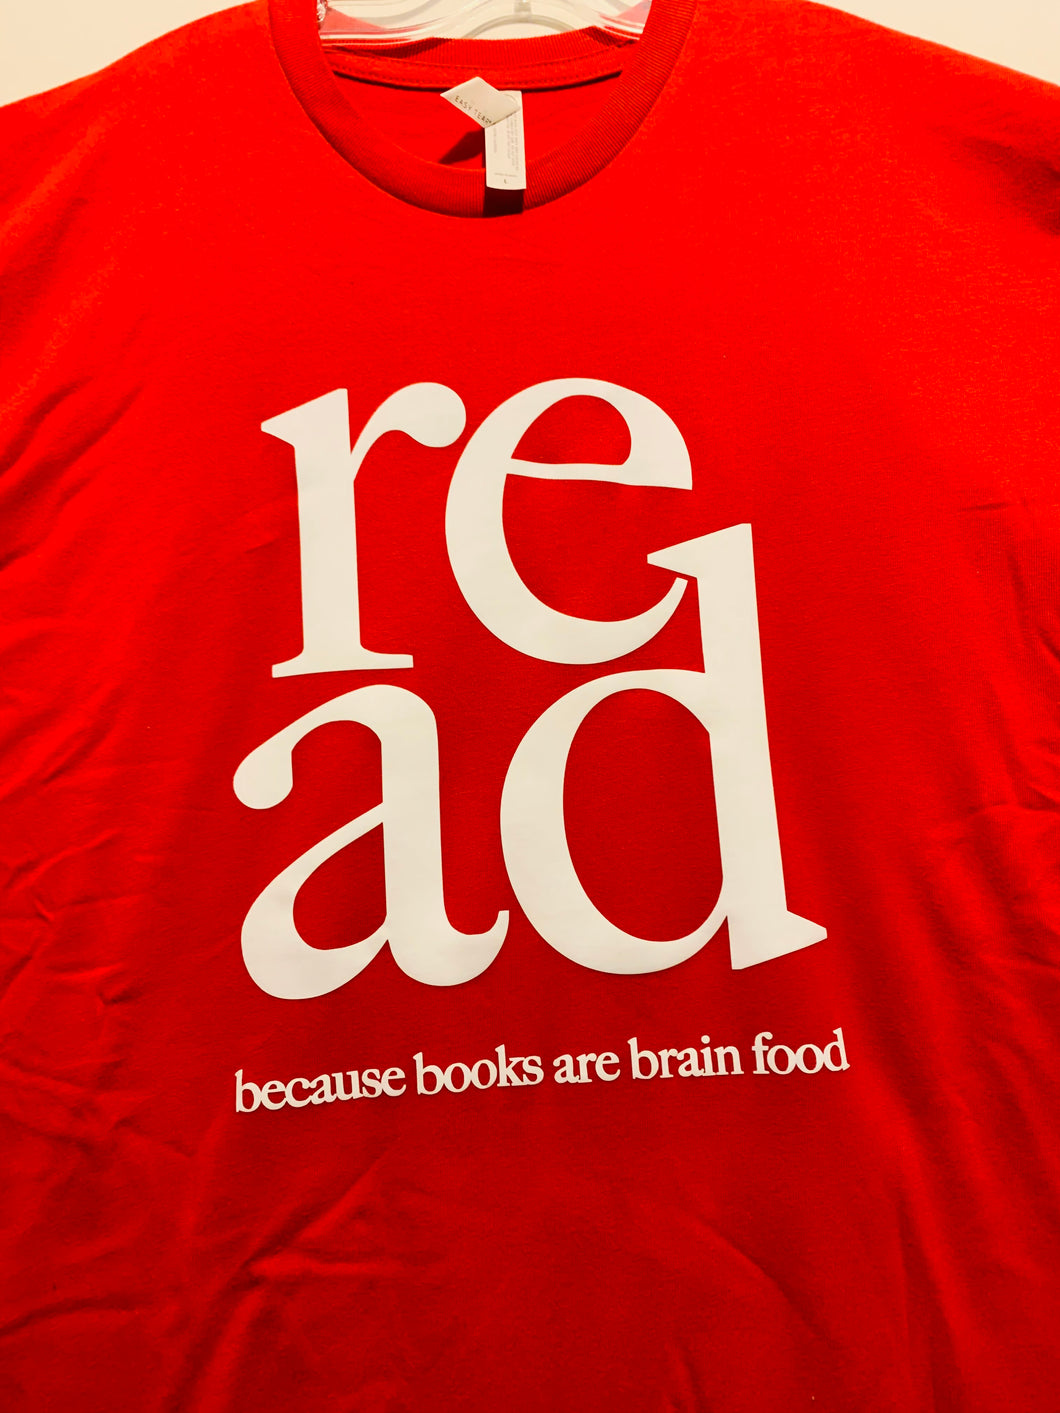 Read because Books are Brain Food T-shirt